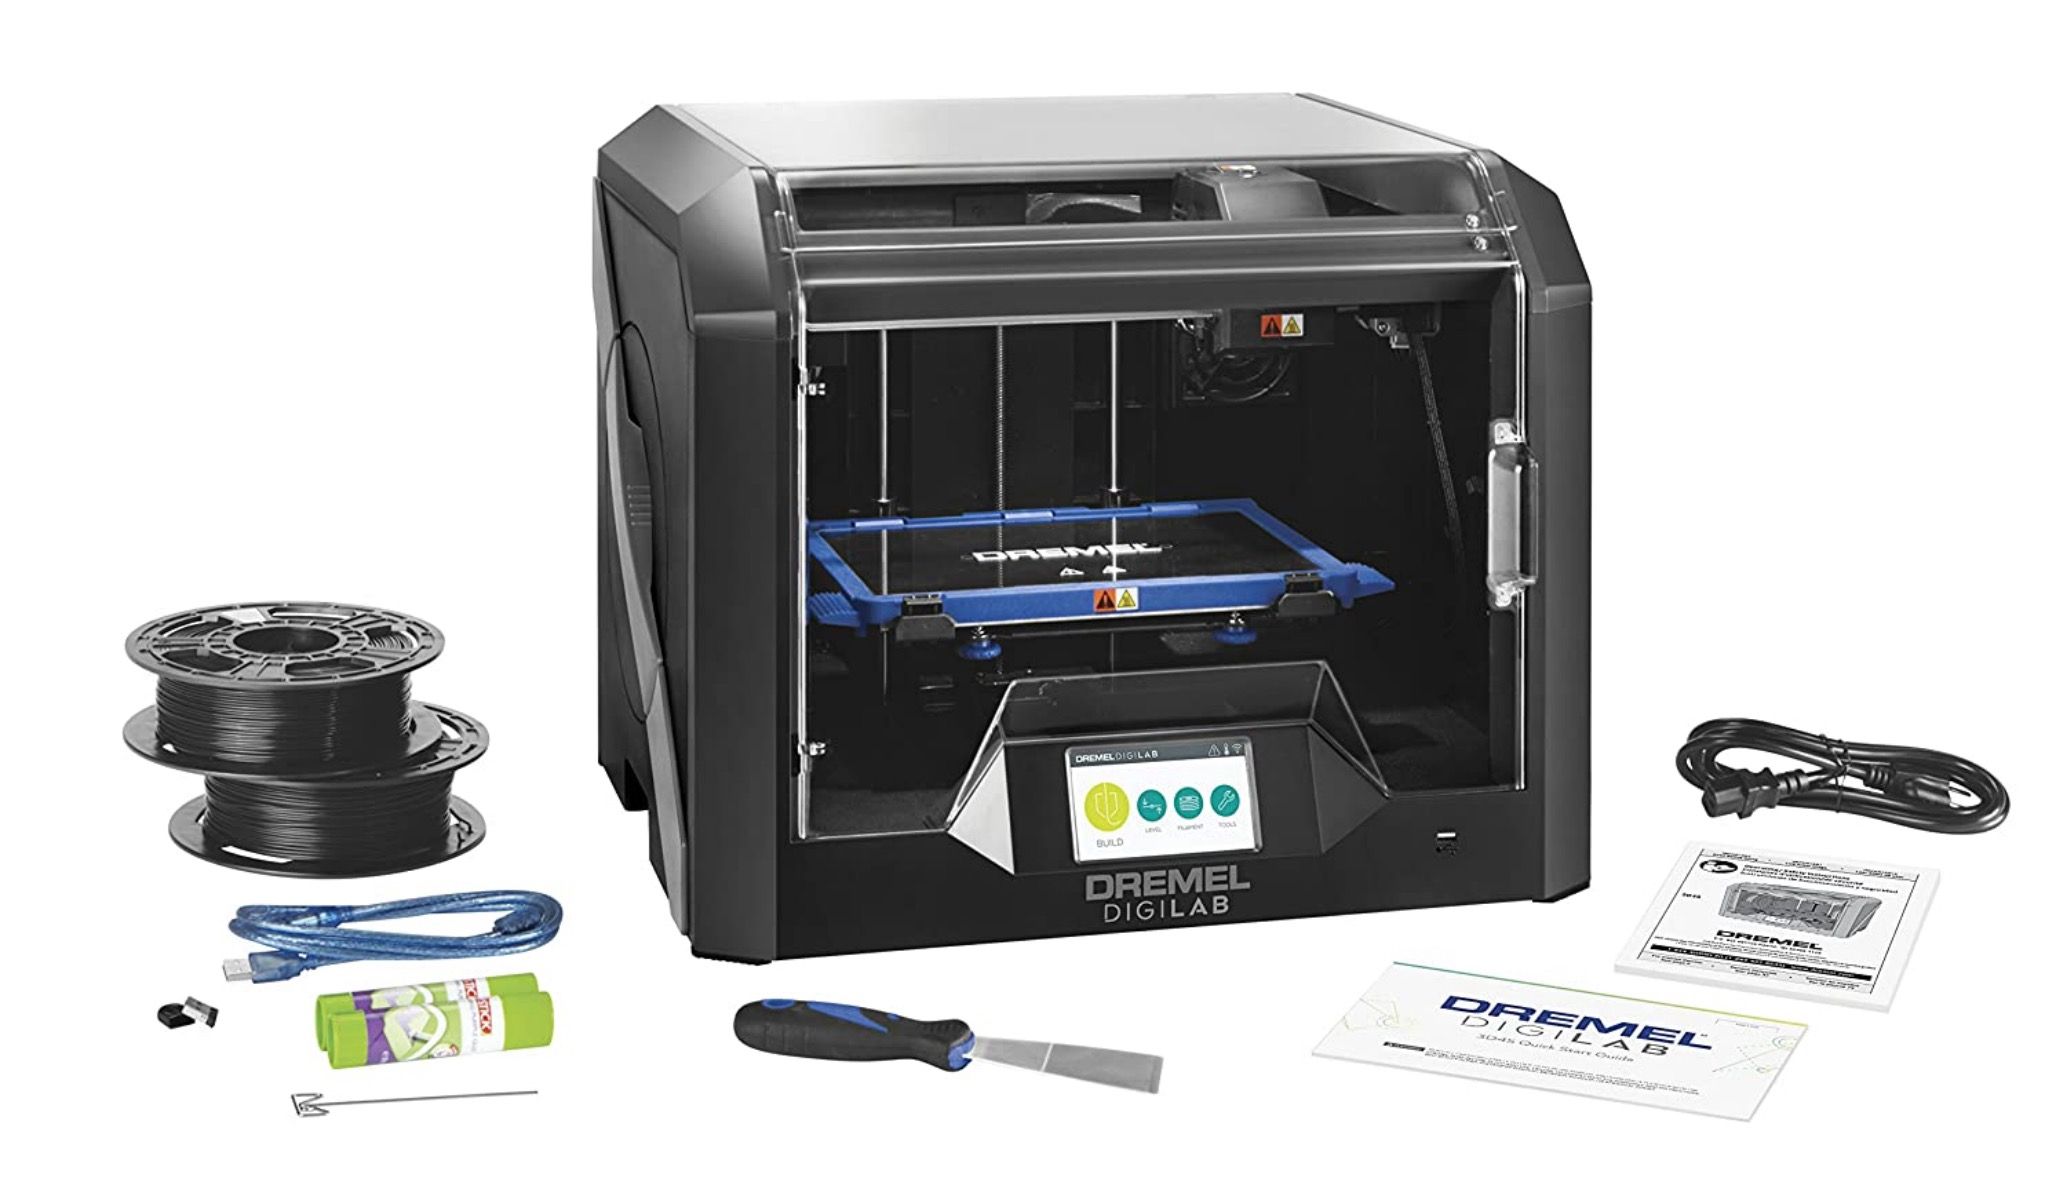 A Dremel DigiLab 3D printer with various accessories surrounding